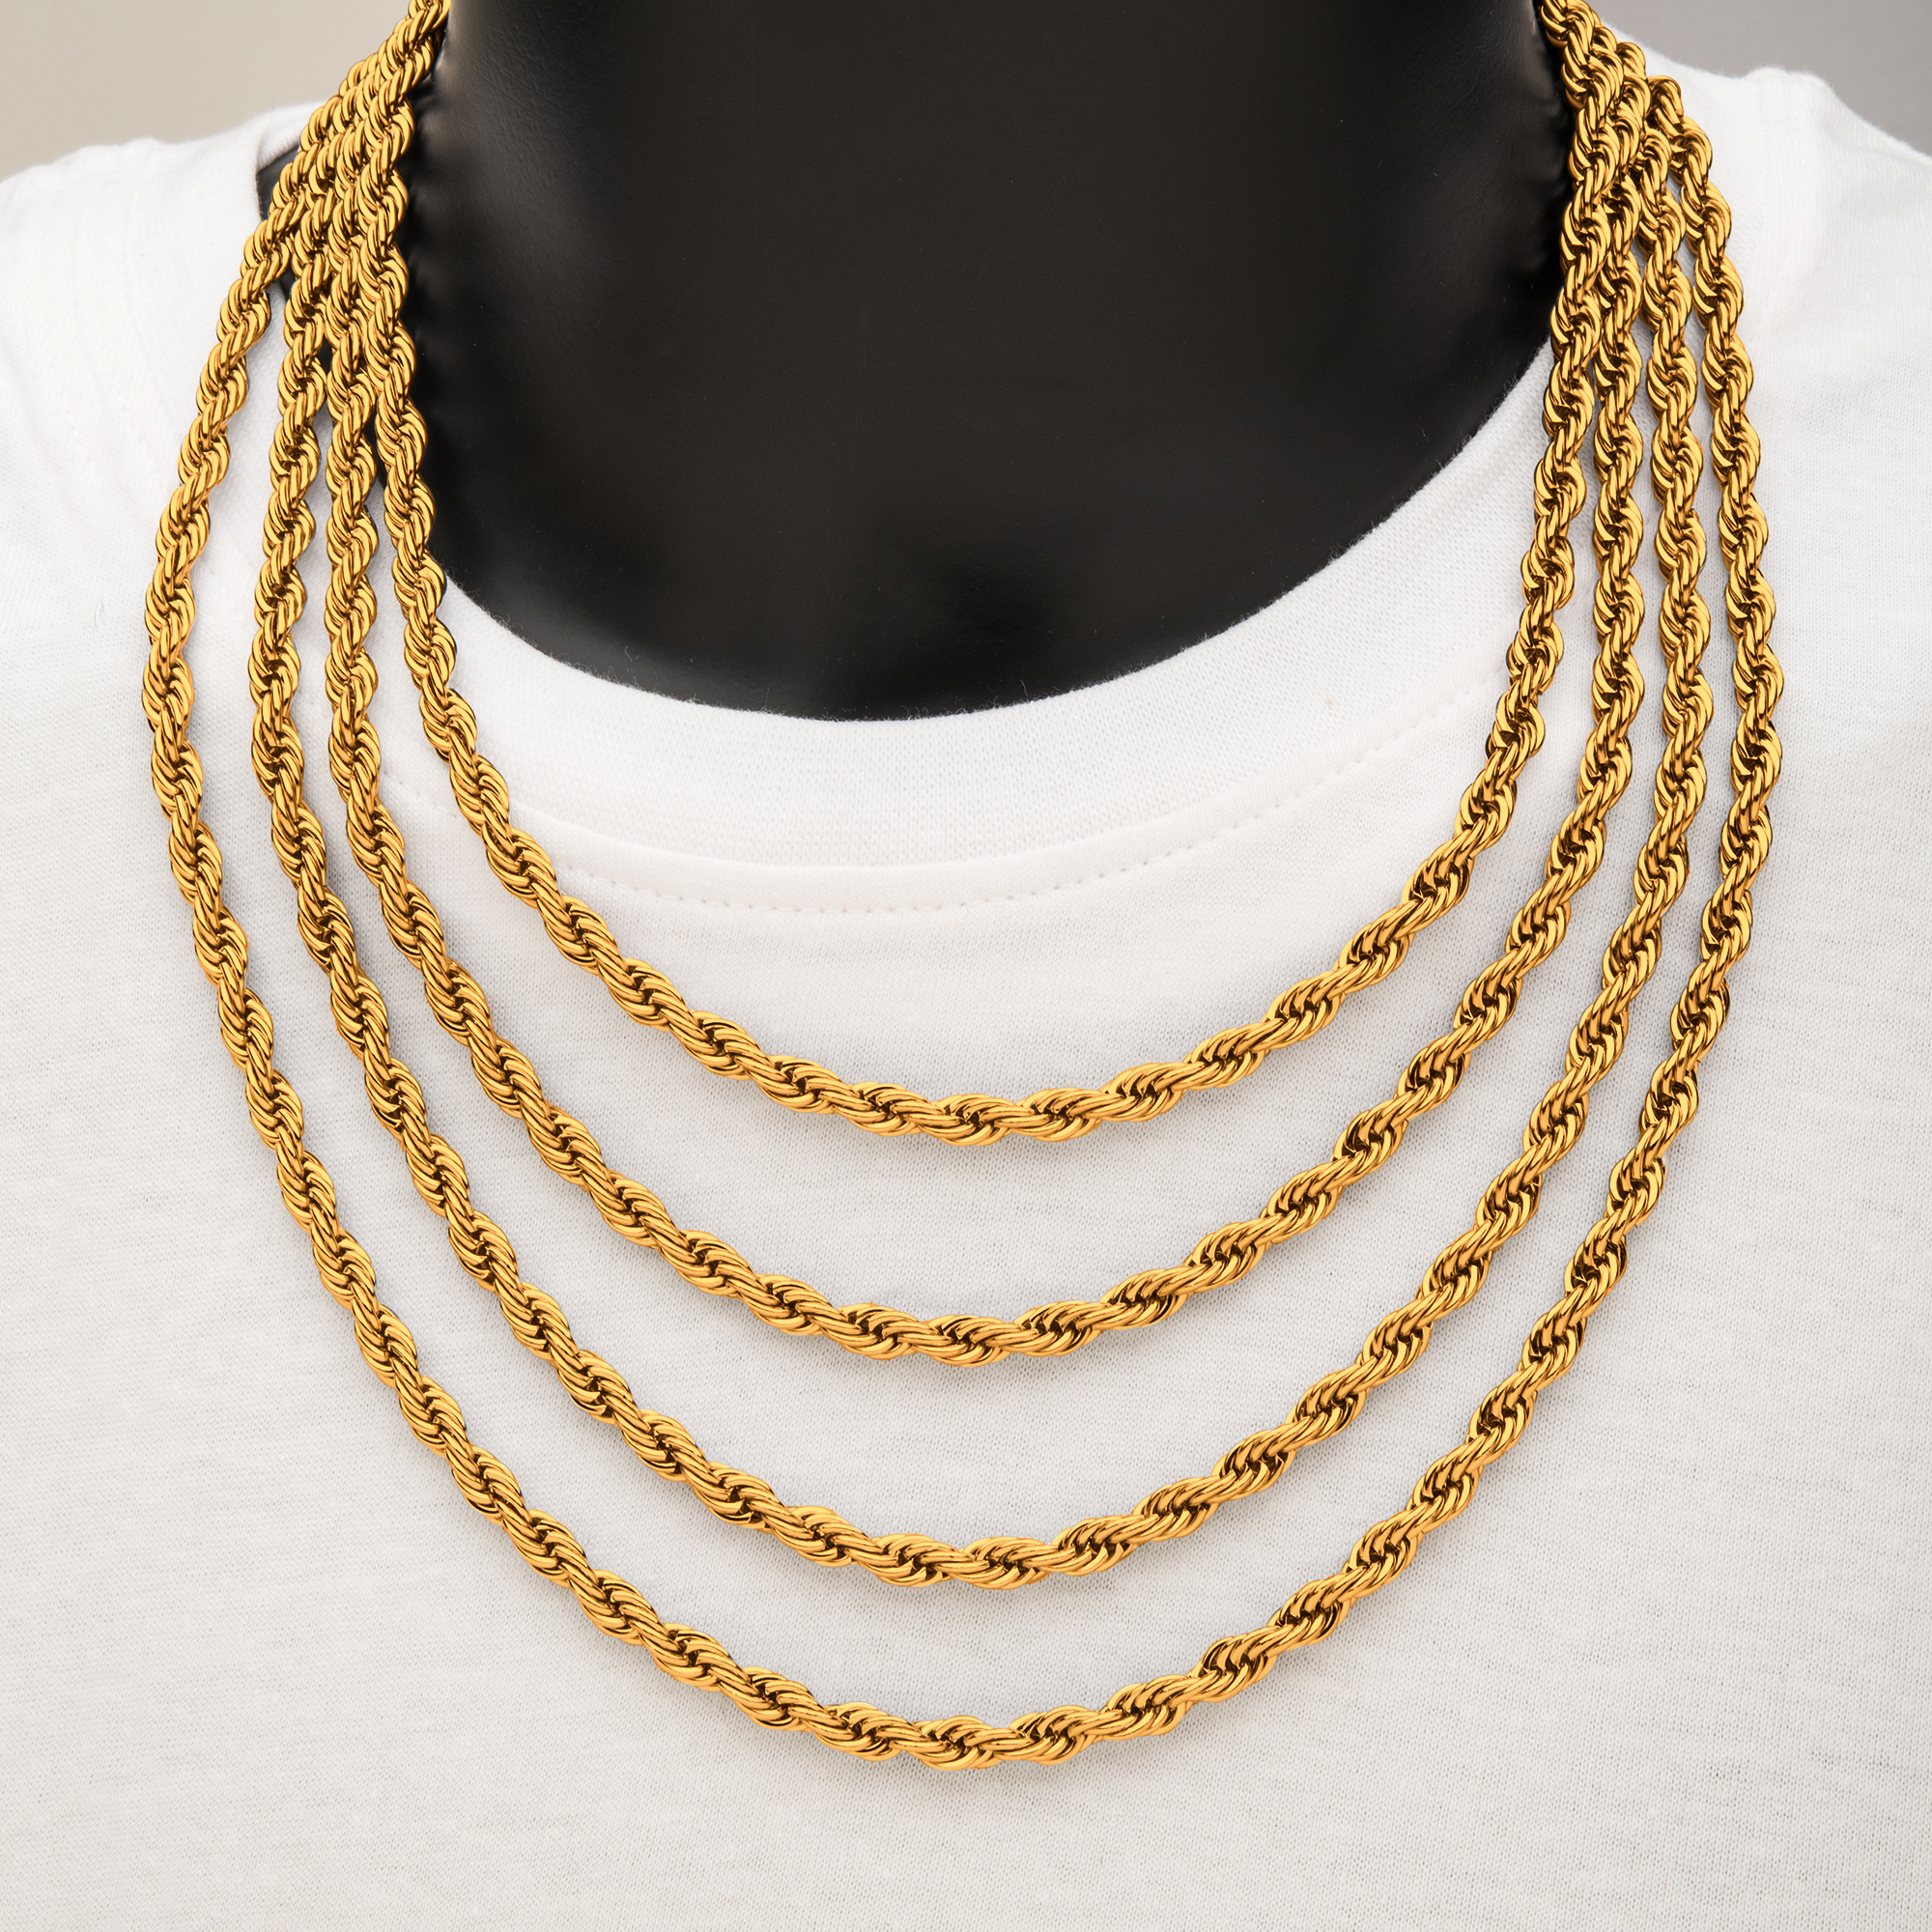 6mm 18K Gold Plated Rope Chain Image 2 P.K. Bennett Jewelers Mundelein, IL